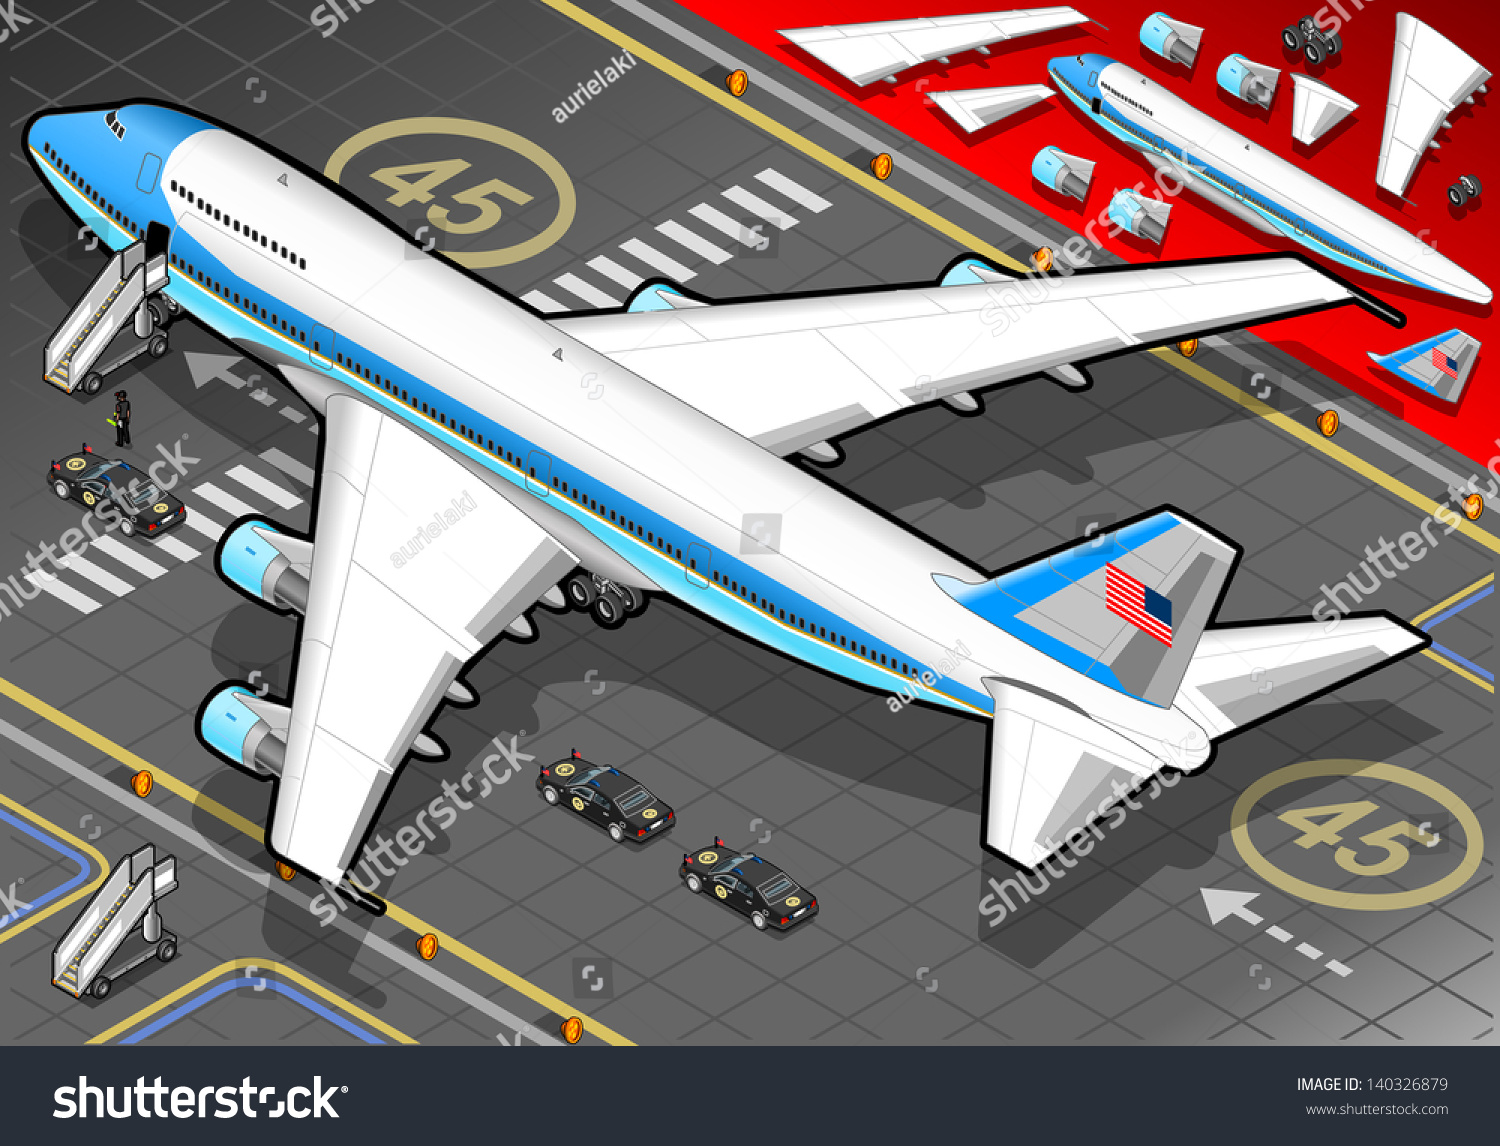 SVG of Boeing aircraft. Flat 3D isometric airplane vehicles. Plane Infographic elements. Landed Airplane in Airport. Armed Forces Military Airplane Isolated. Presidential Air Force One Vector Illustration. svg